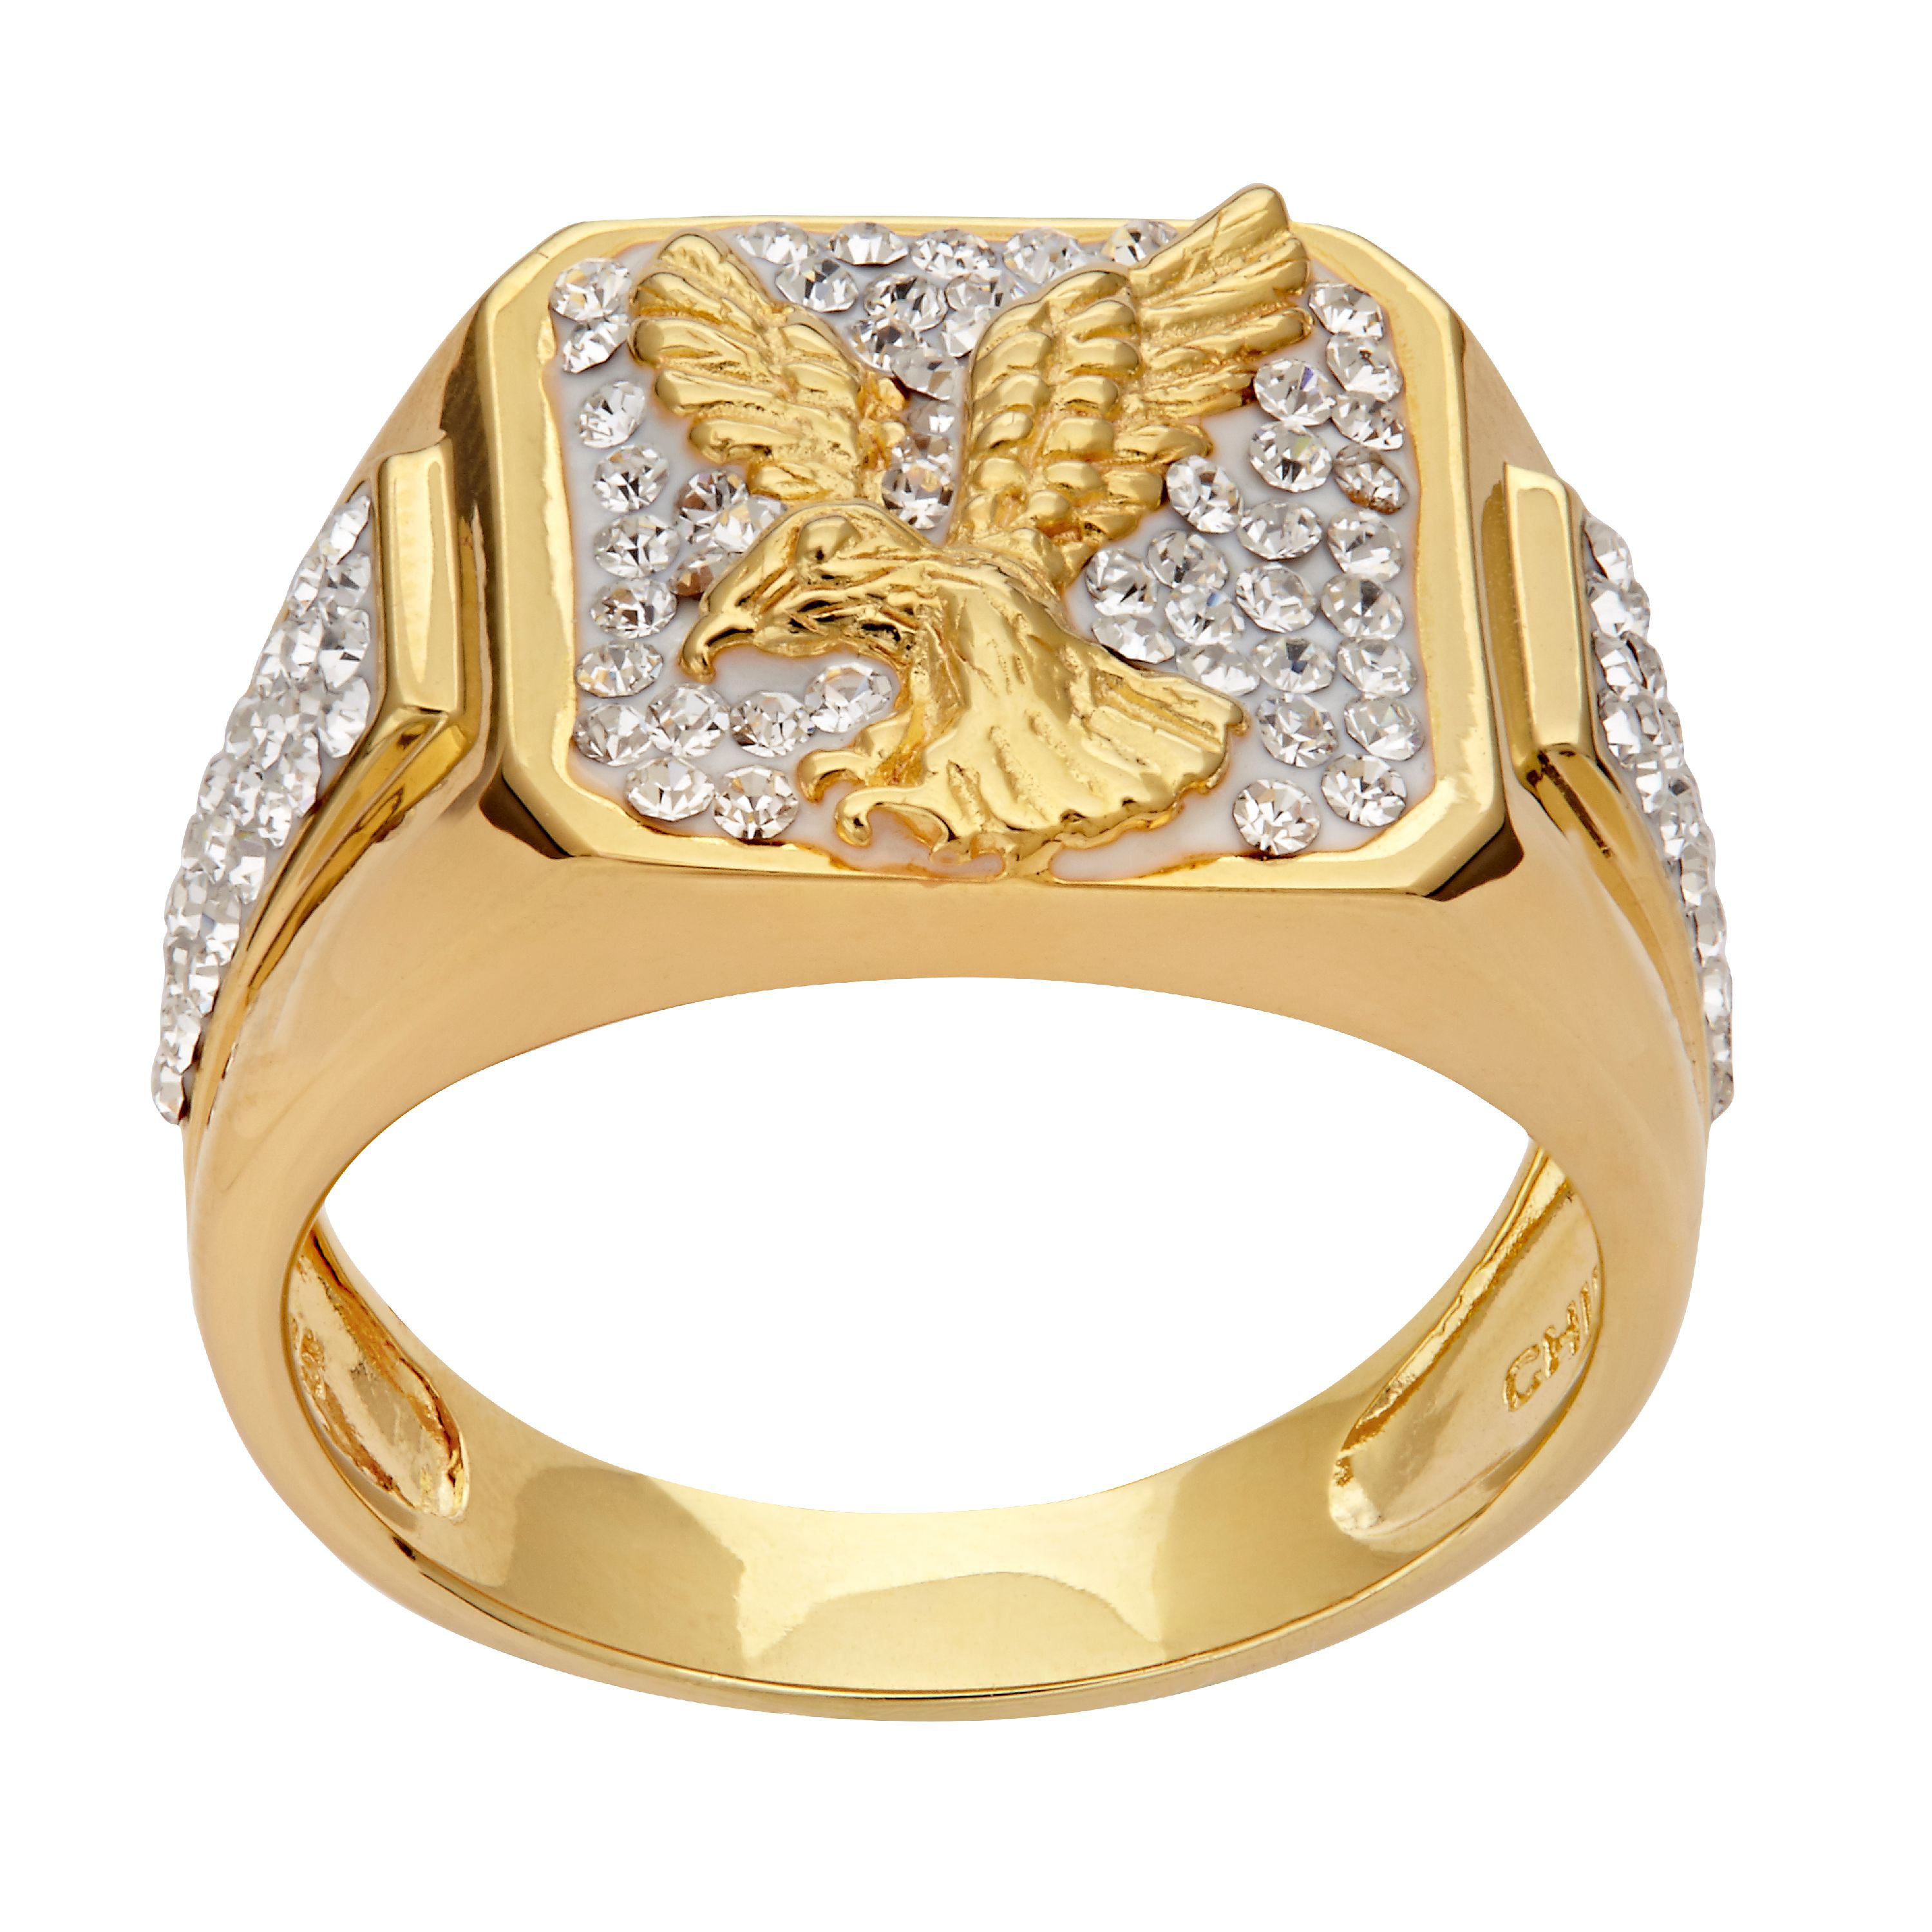 Brilliance Fine Jewelry Crystals Eagle Ring in Sterling Silver and 18K